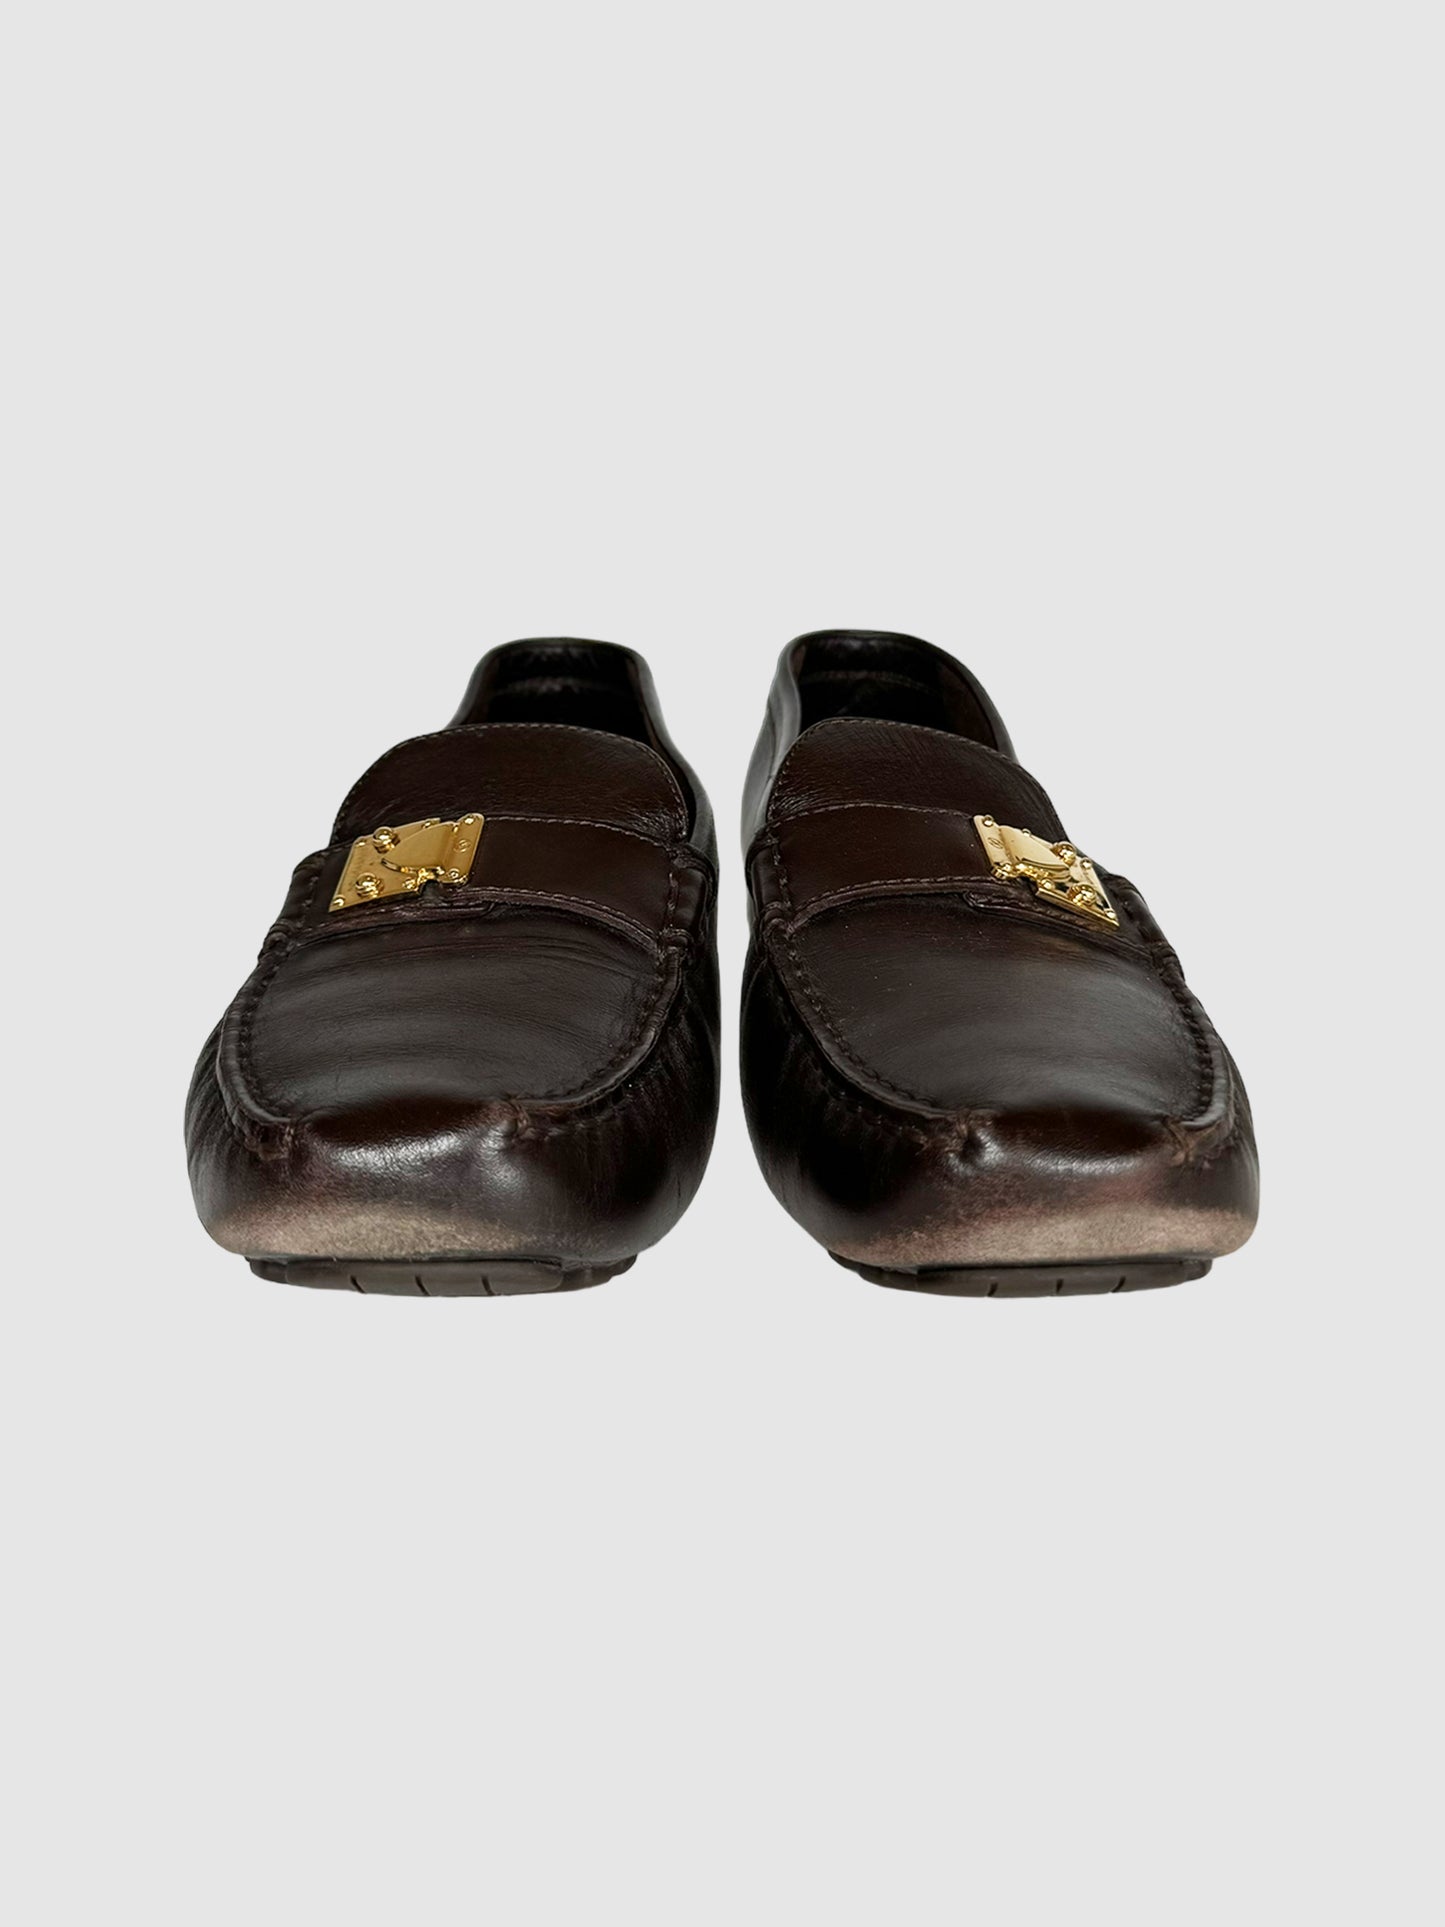 Leather Loafers with Hardware - Size 38.5